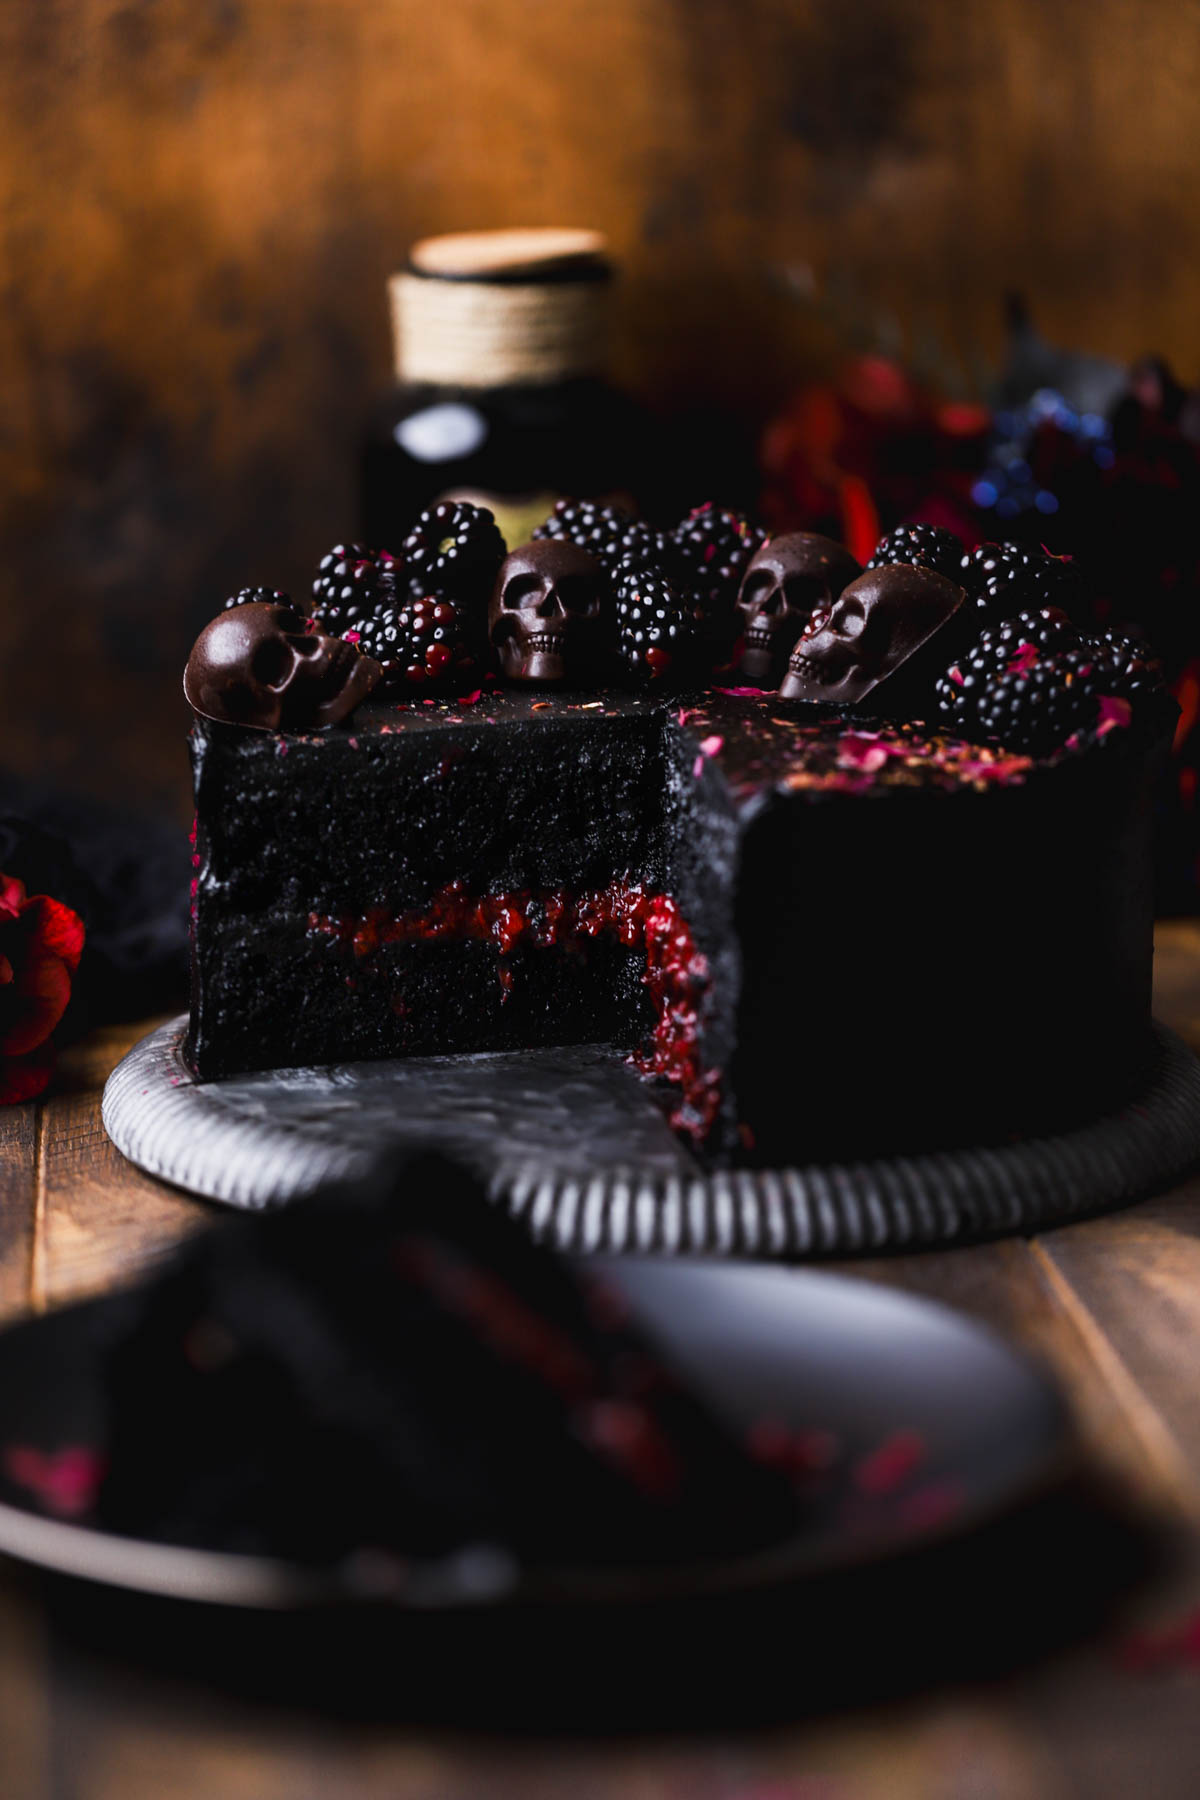 Black velvet halloween cake with fresh blackberry compote, chocolate skulls and dried rose petals.  